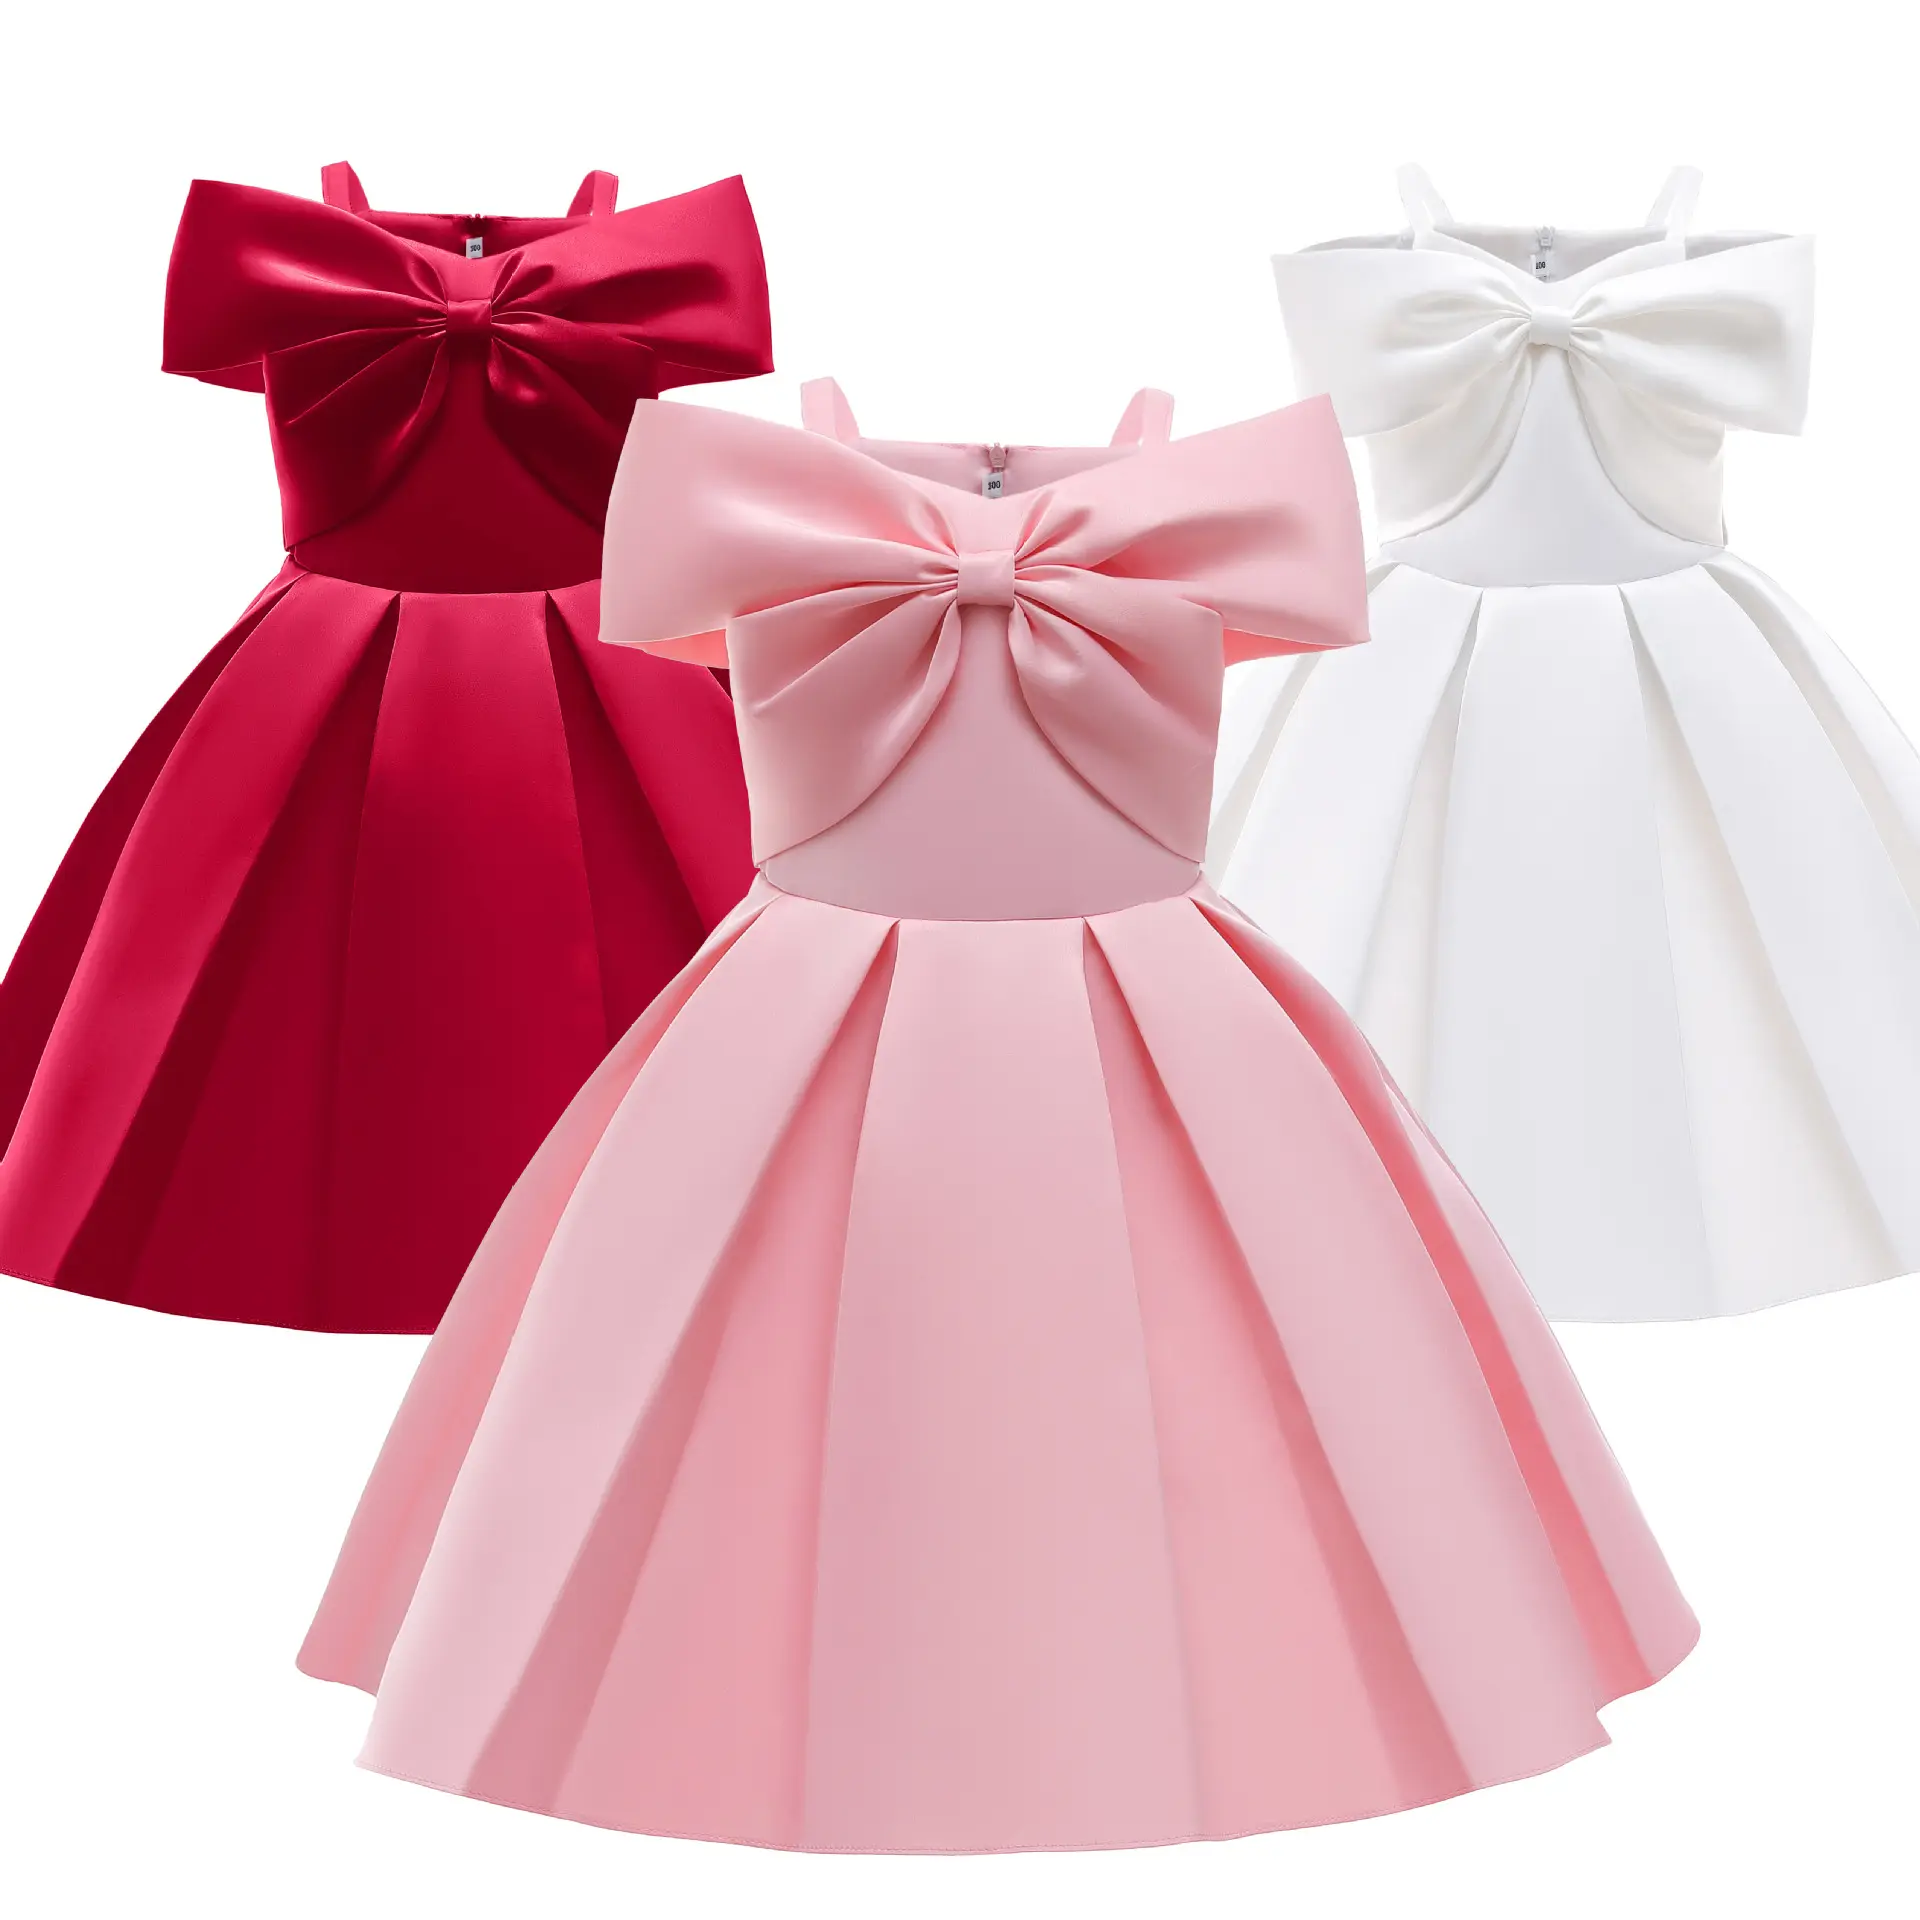 0076 Kids Baby Girls Summer Dresses Birthday Party Wedding Formal Clothing Princess Dress Children Prom Ball Gown Pageant Dress